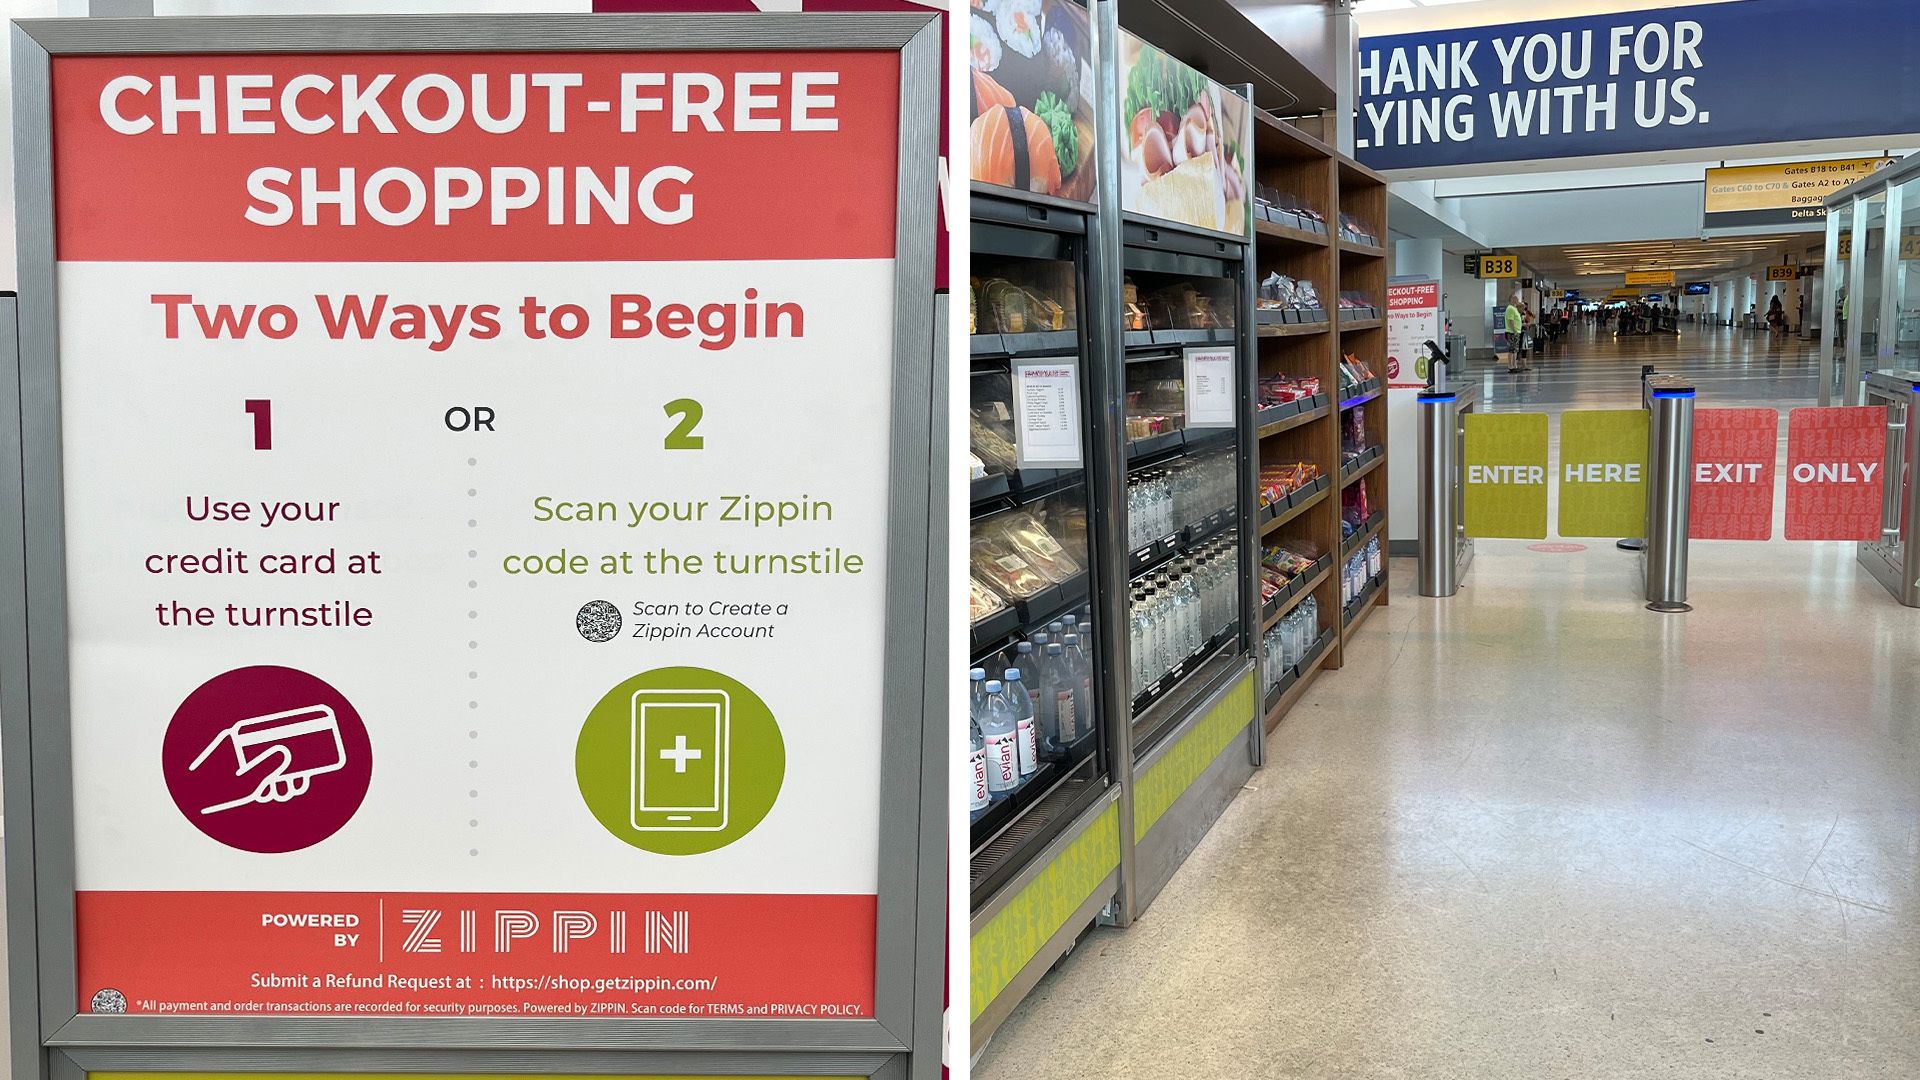 Side-by-side images of a checkout-free store at JFK airport